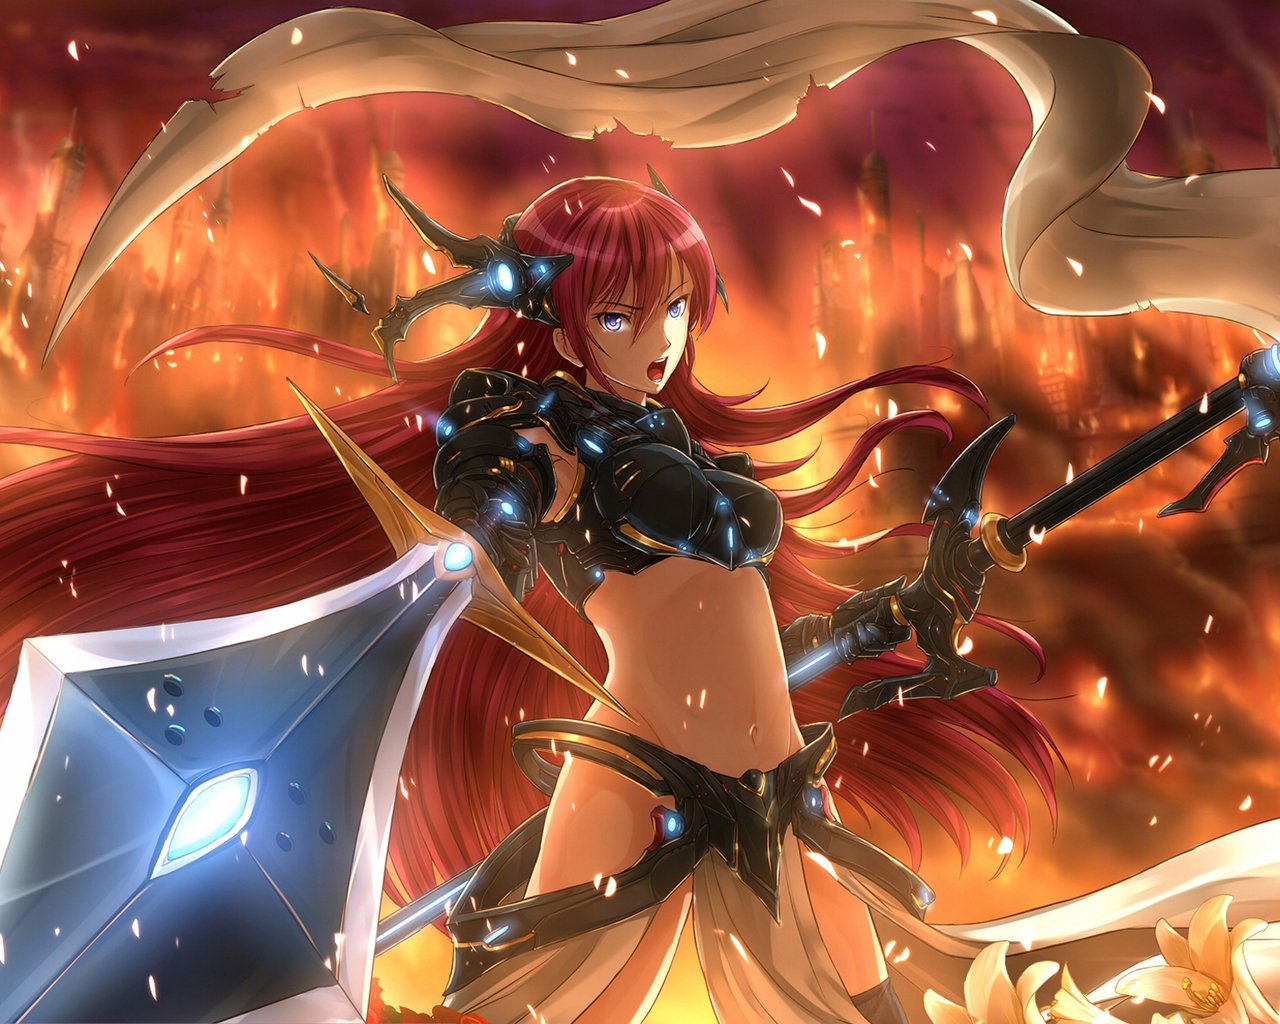 Megurine Luka in Fire for 1280 x 1024 resolution